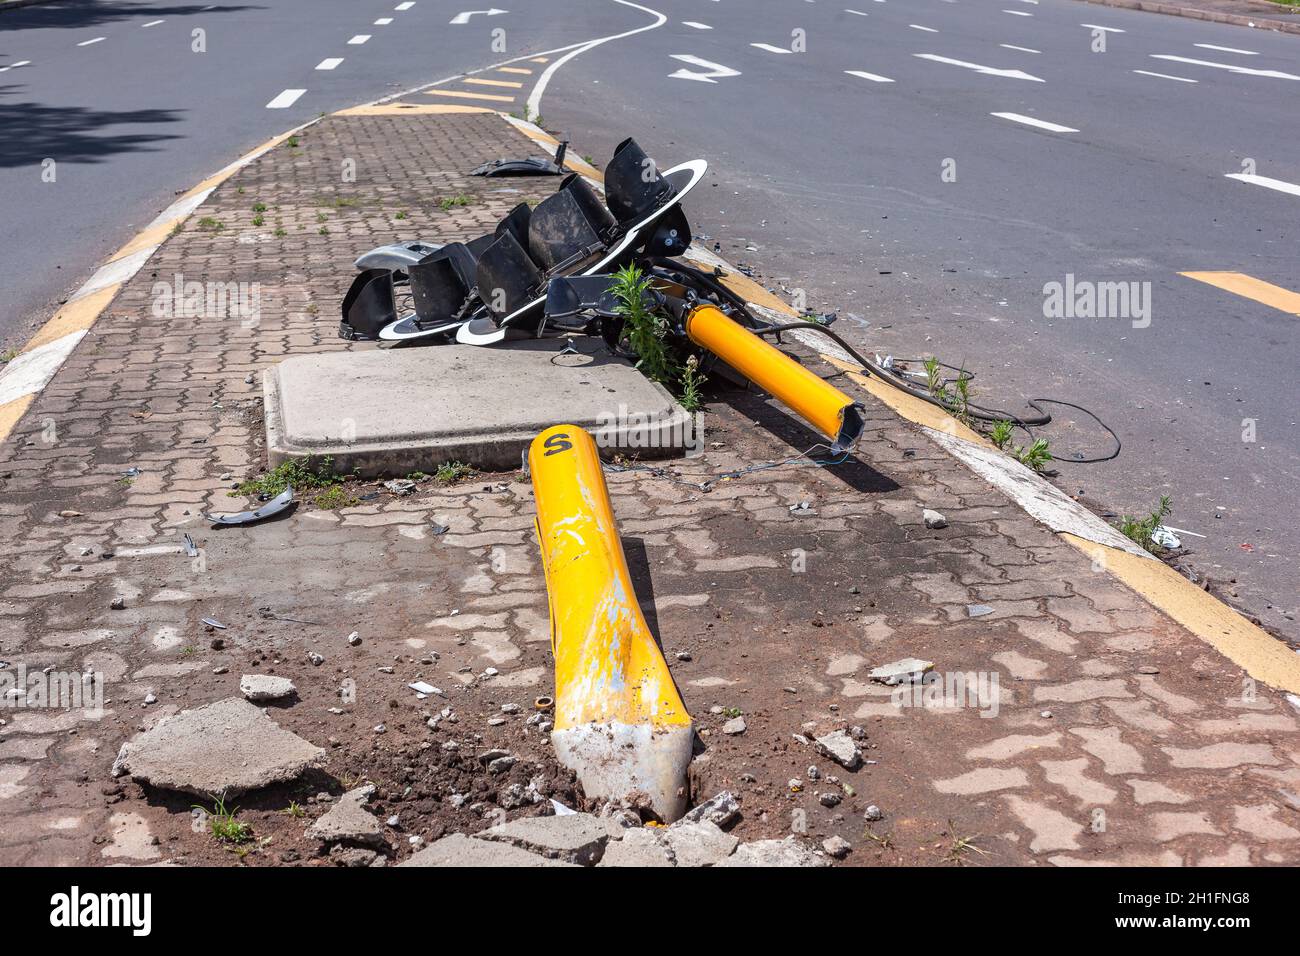 Road Traffic lights close-up destroyed broken on the floor vehicle collision at inter section. Stock Photo